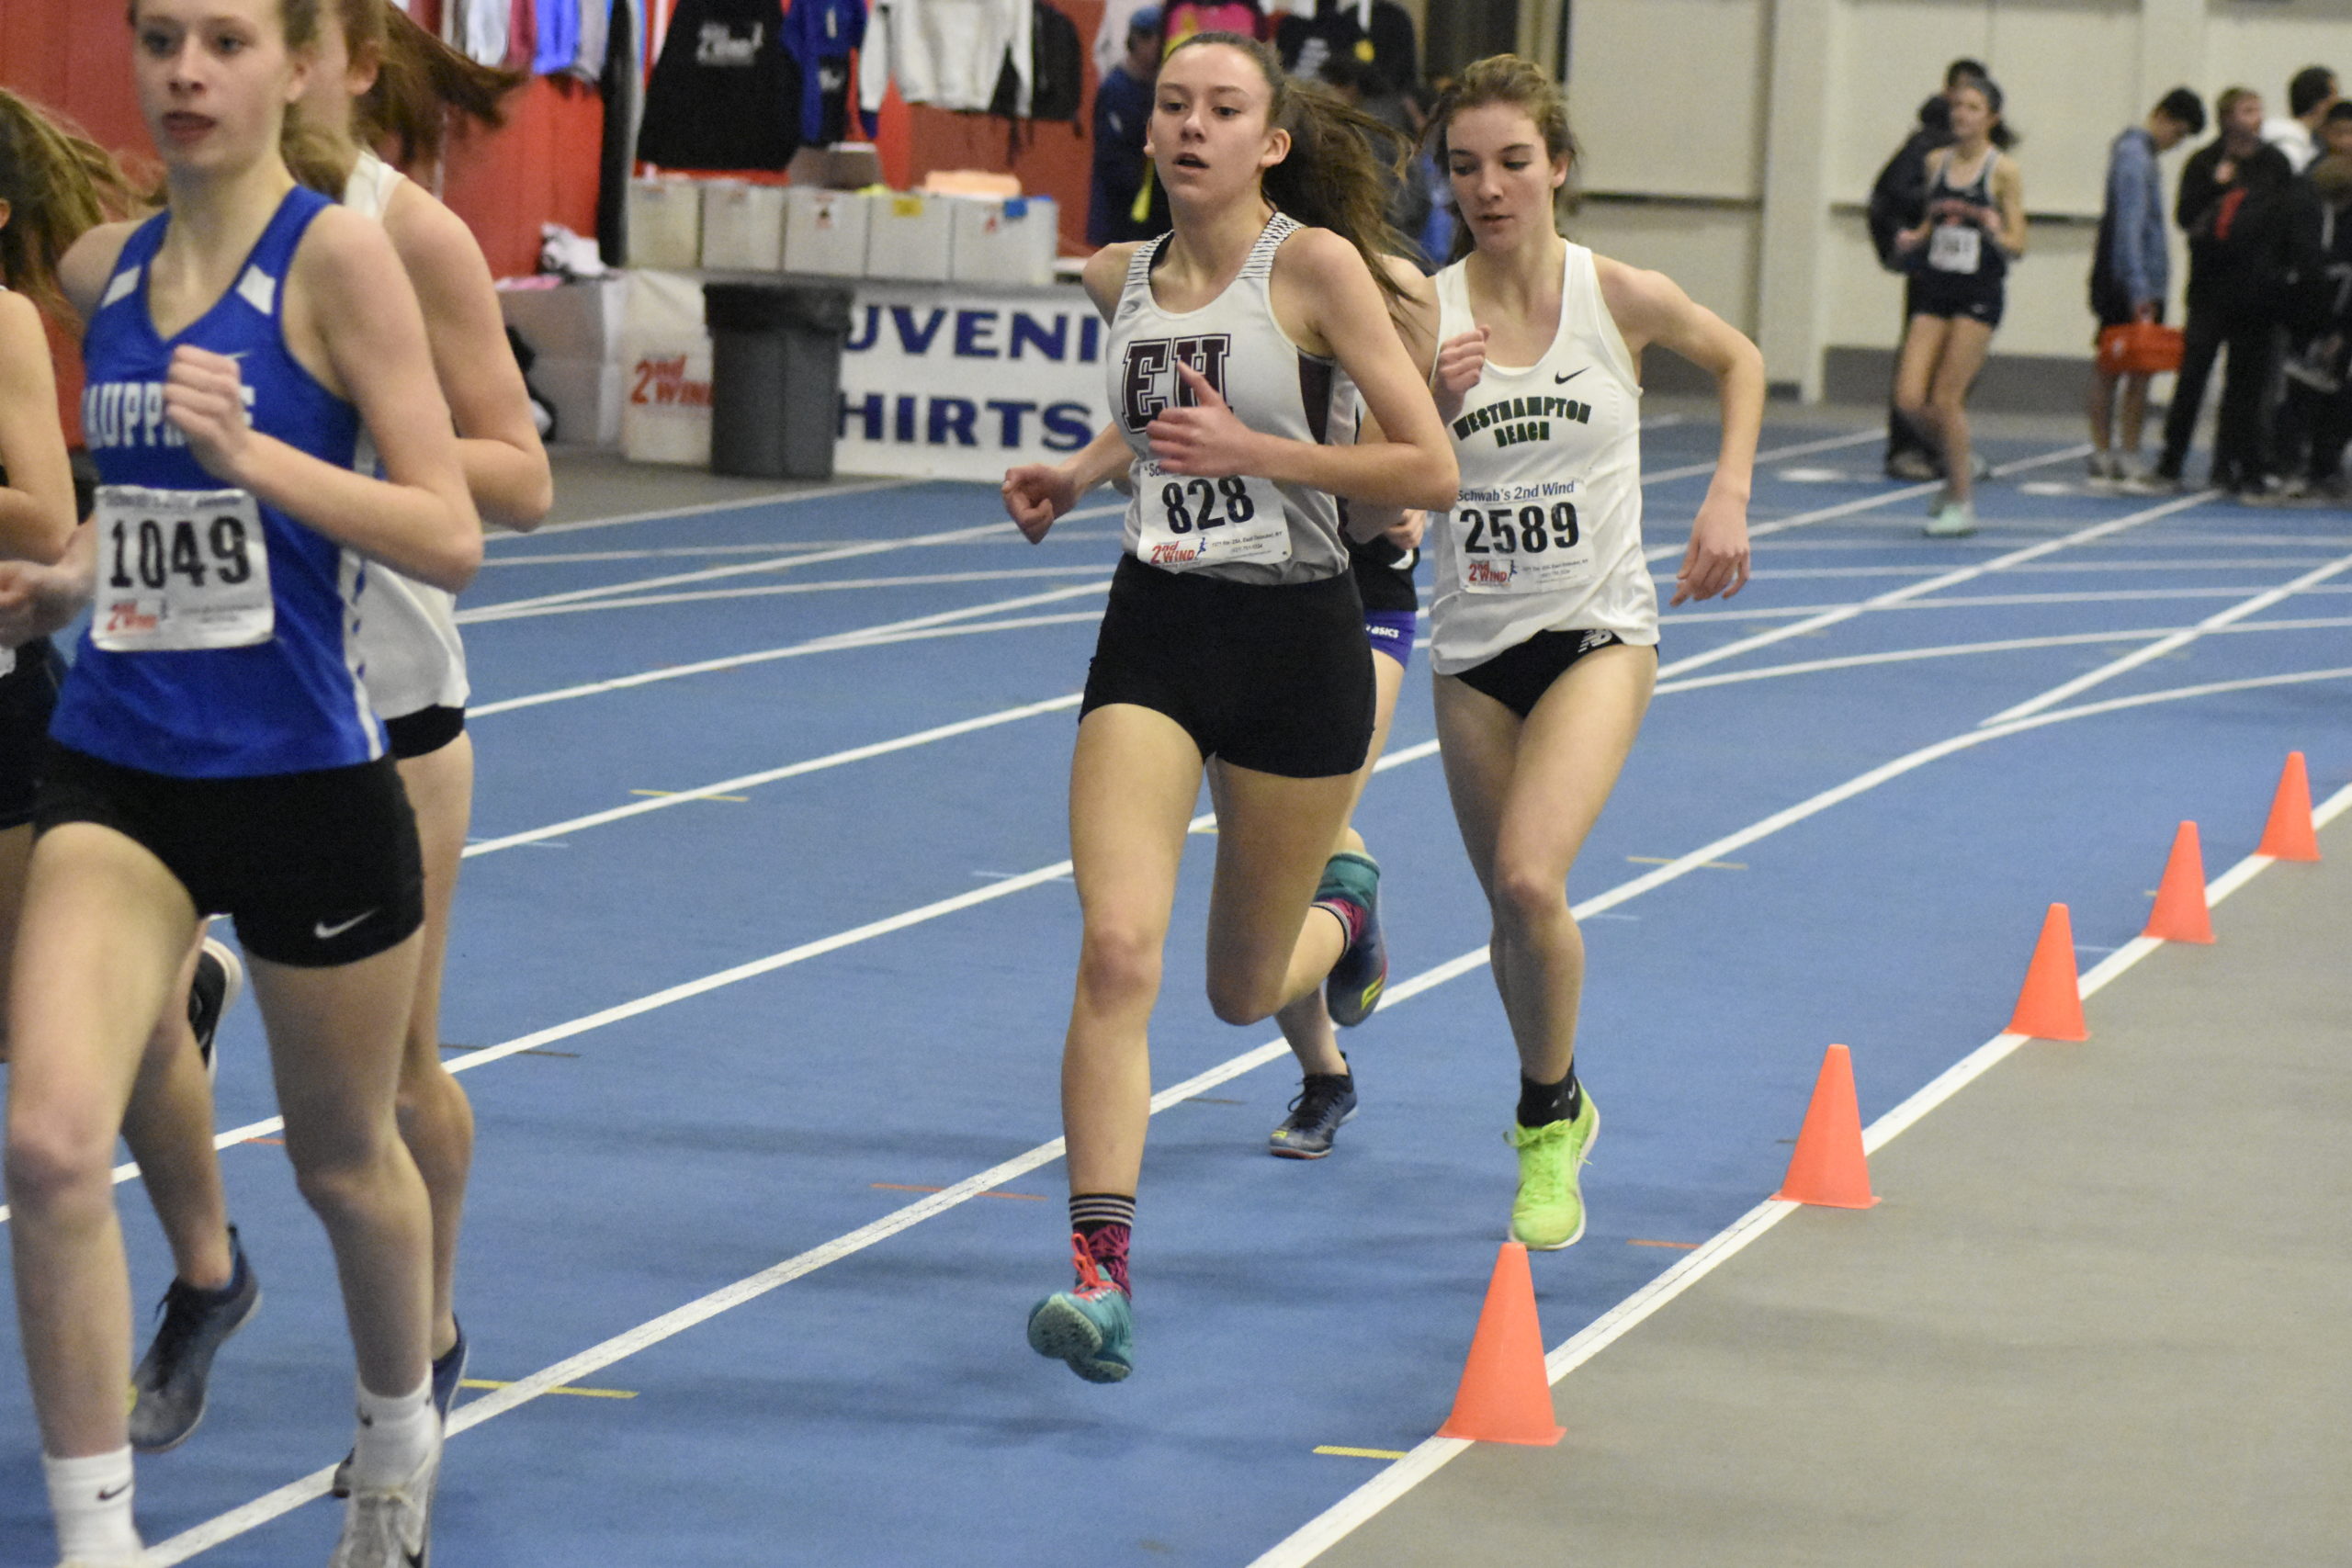 Pierson junior Penelope Greene placed fourth in the highly competitive 1,500-meter race.